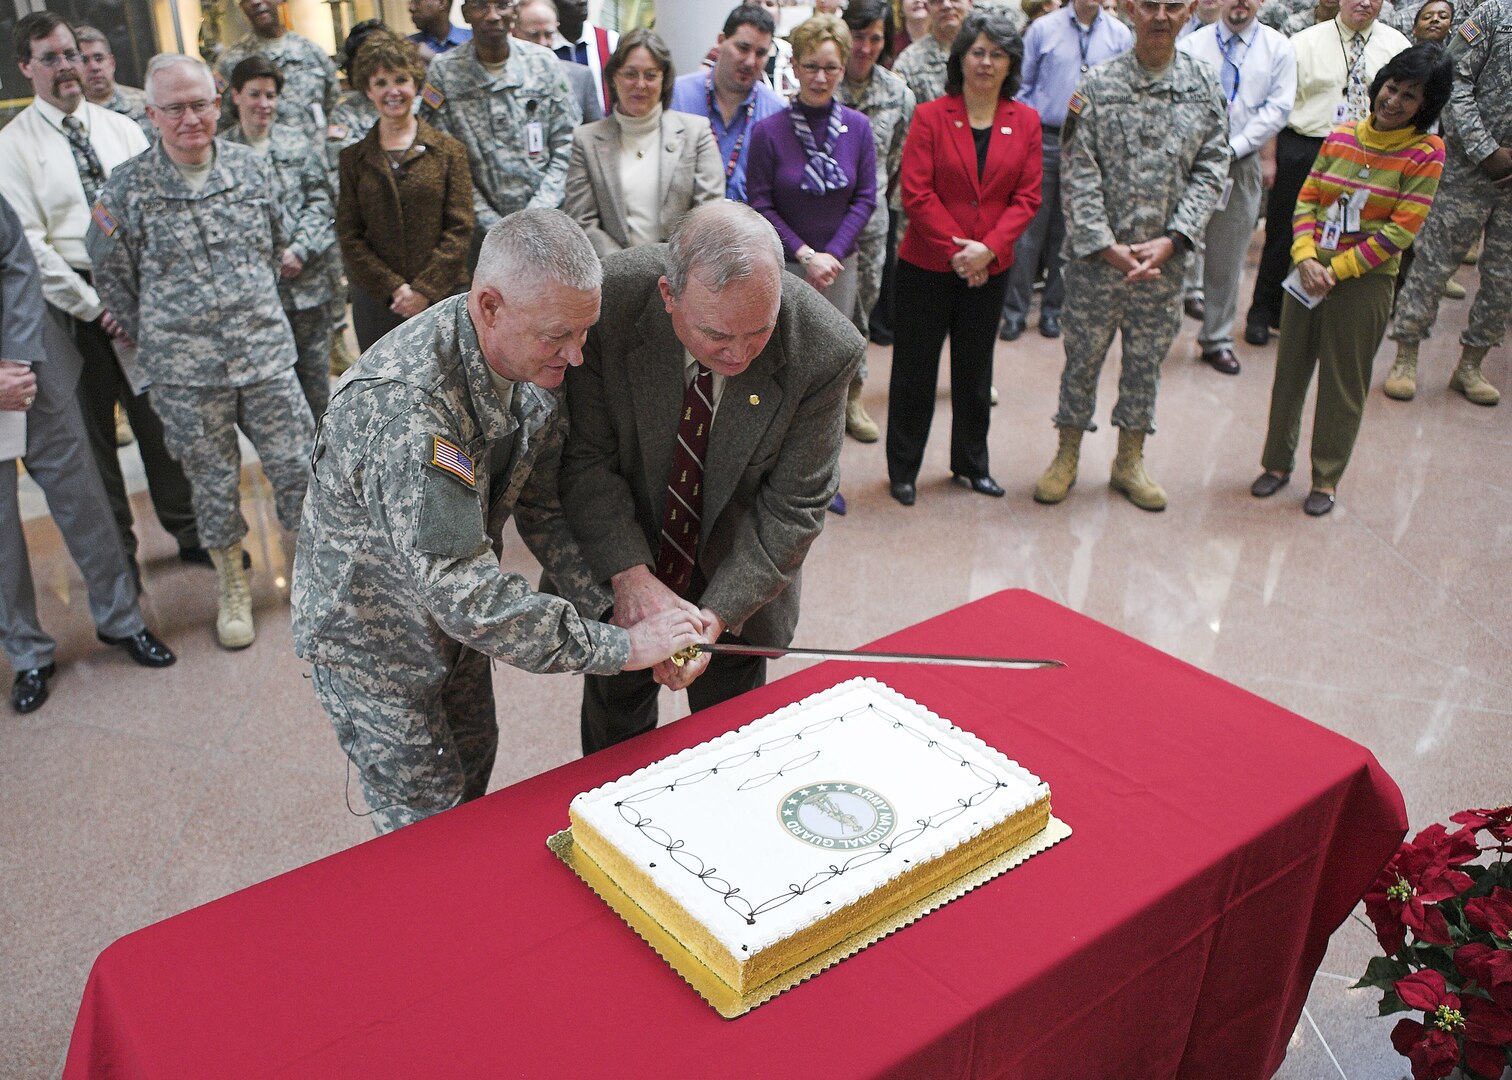 Lt. Gen. Clyde Vaughn, director of the Army National Guard, and Gene McDaniel, who recently surpassed 50 years of federal service, teamed up, with a sword, of course, to cut the cake during the National Guard's 370th birthday Dec. 13 at the Army National Guard Readiness Center in Arlington, Va.